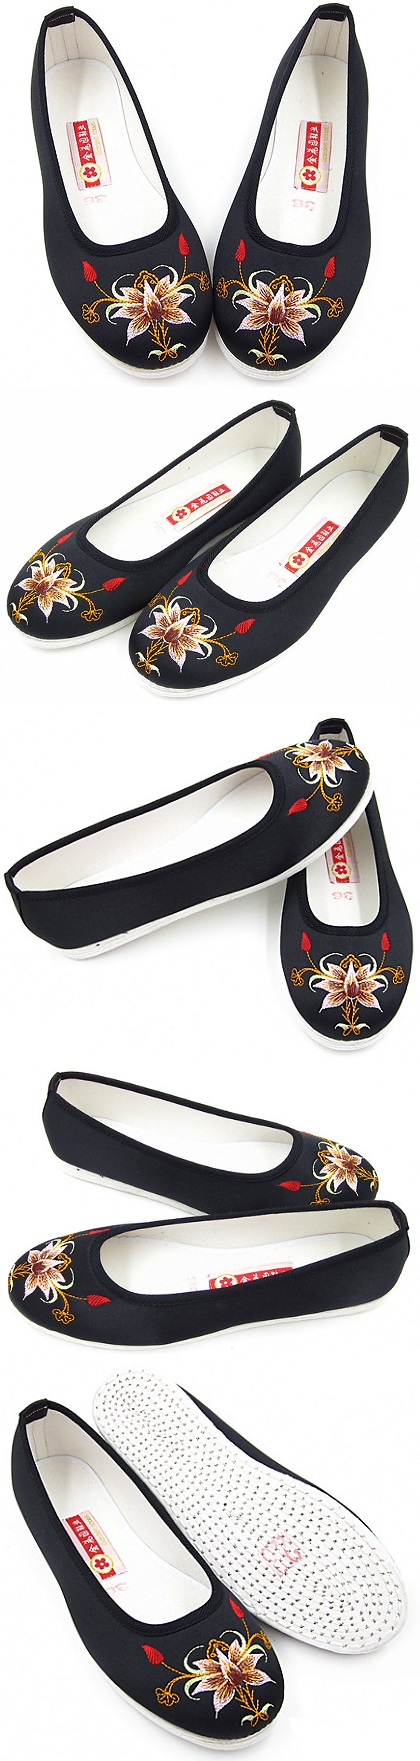 Satin Lotus Embroidery Shoes (Black)